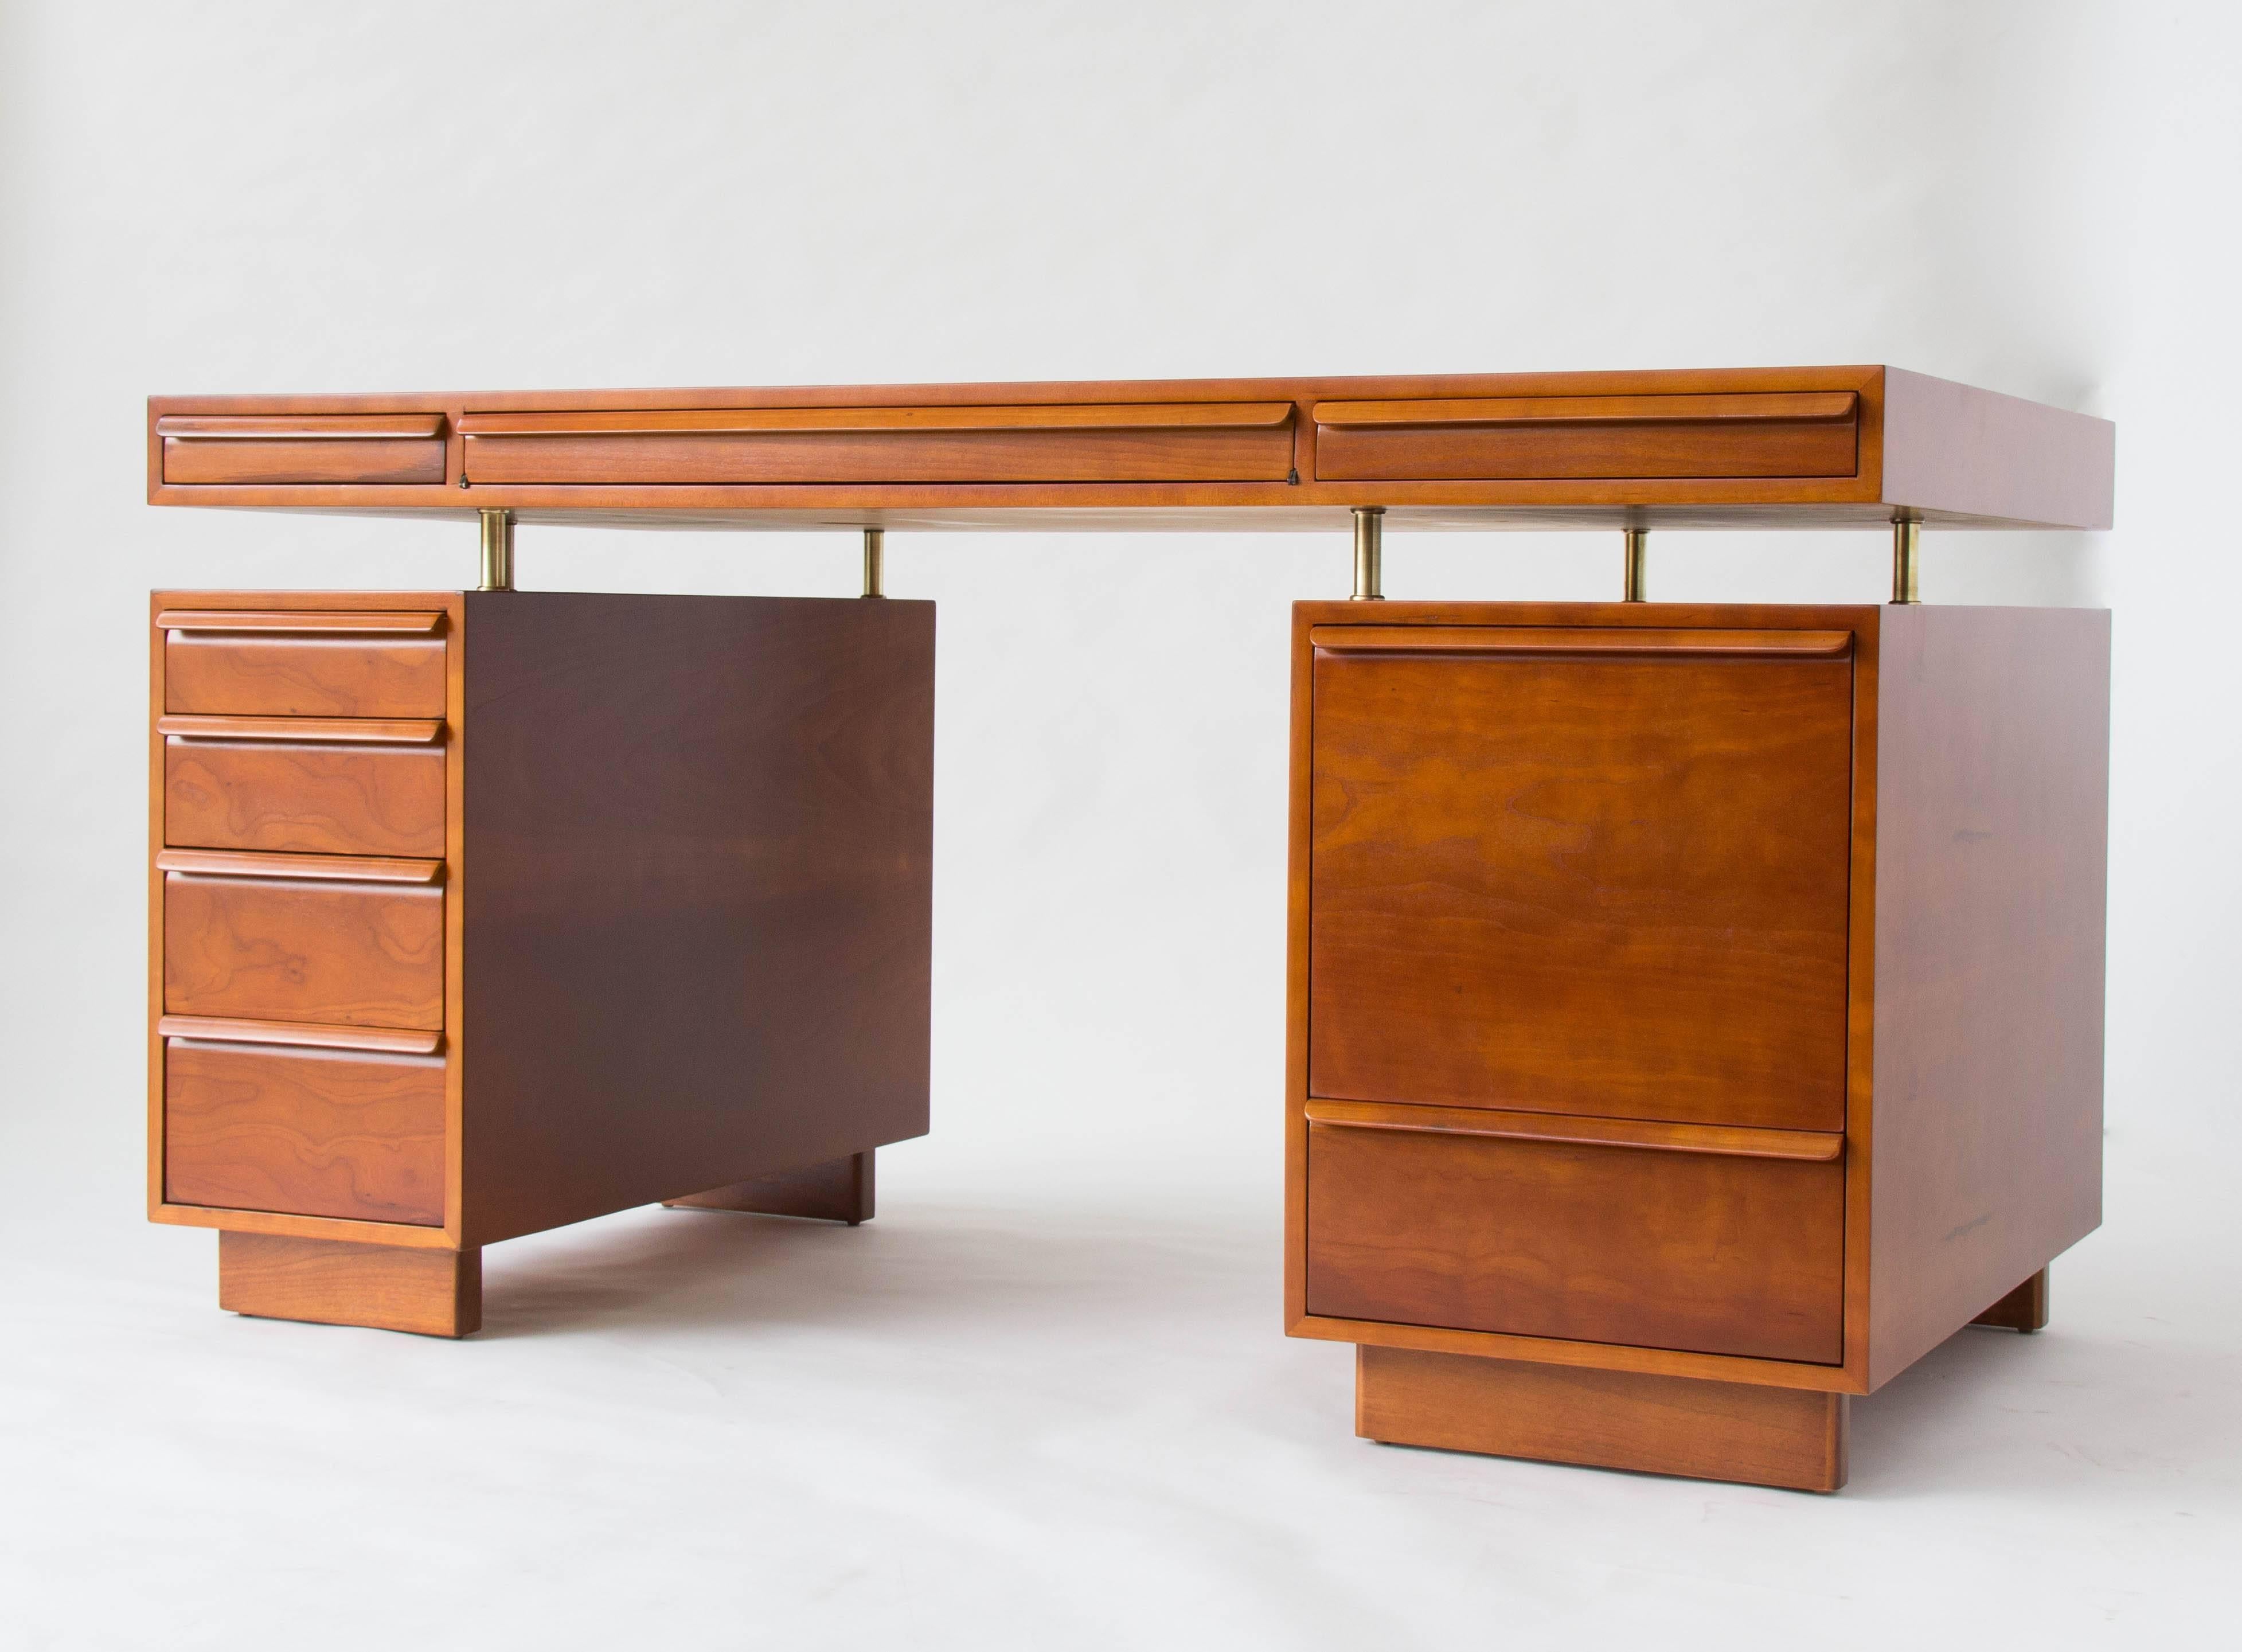 An executive desk in warm-toned cherrywood with a floating workspace on brass spacers. The two drawer stacks are mirrored on either side of the desk, which is configured for two workers. There is a shallow pass-through compartment at the center of